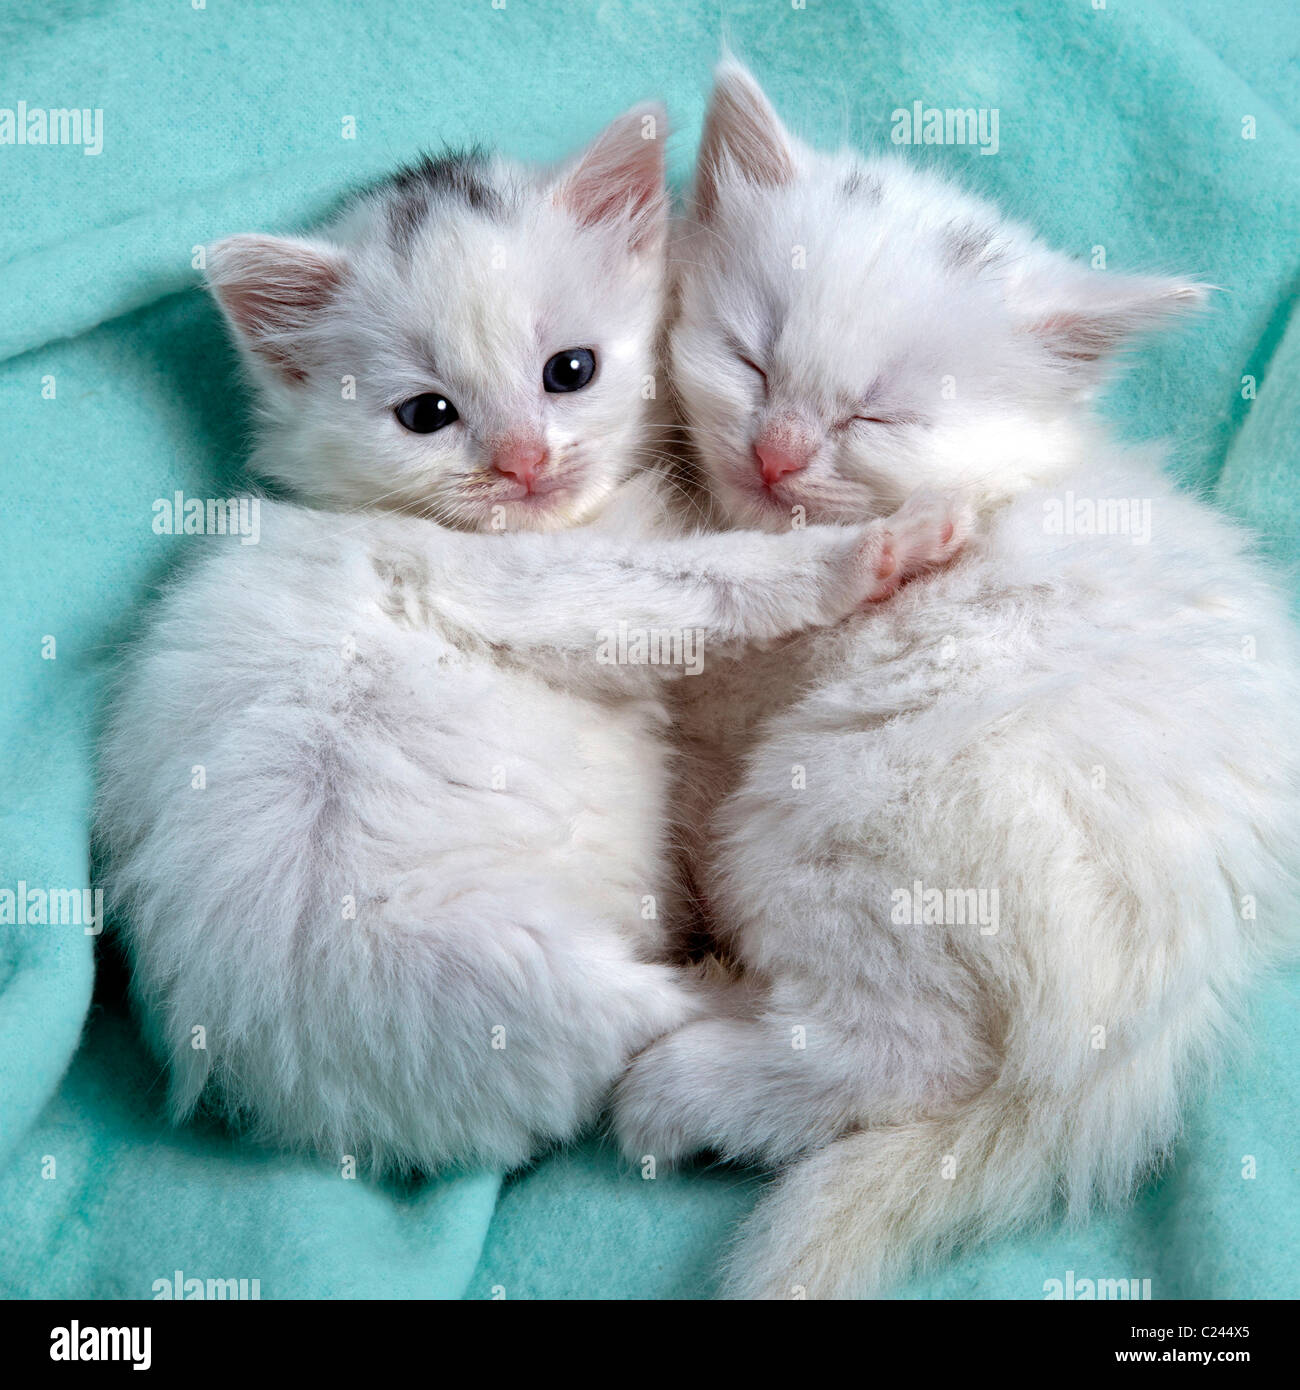 CUTE white kittens sleeping together Stock Photo